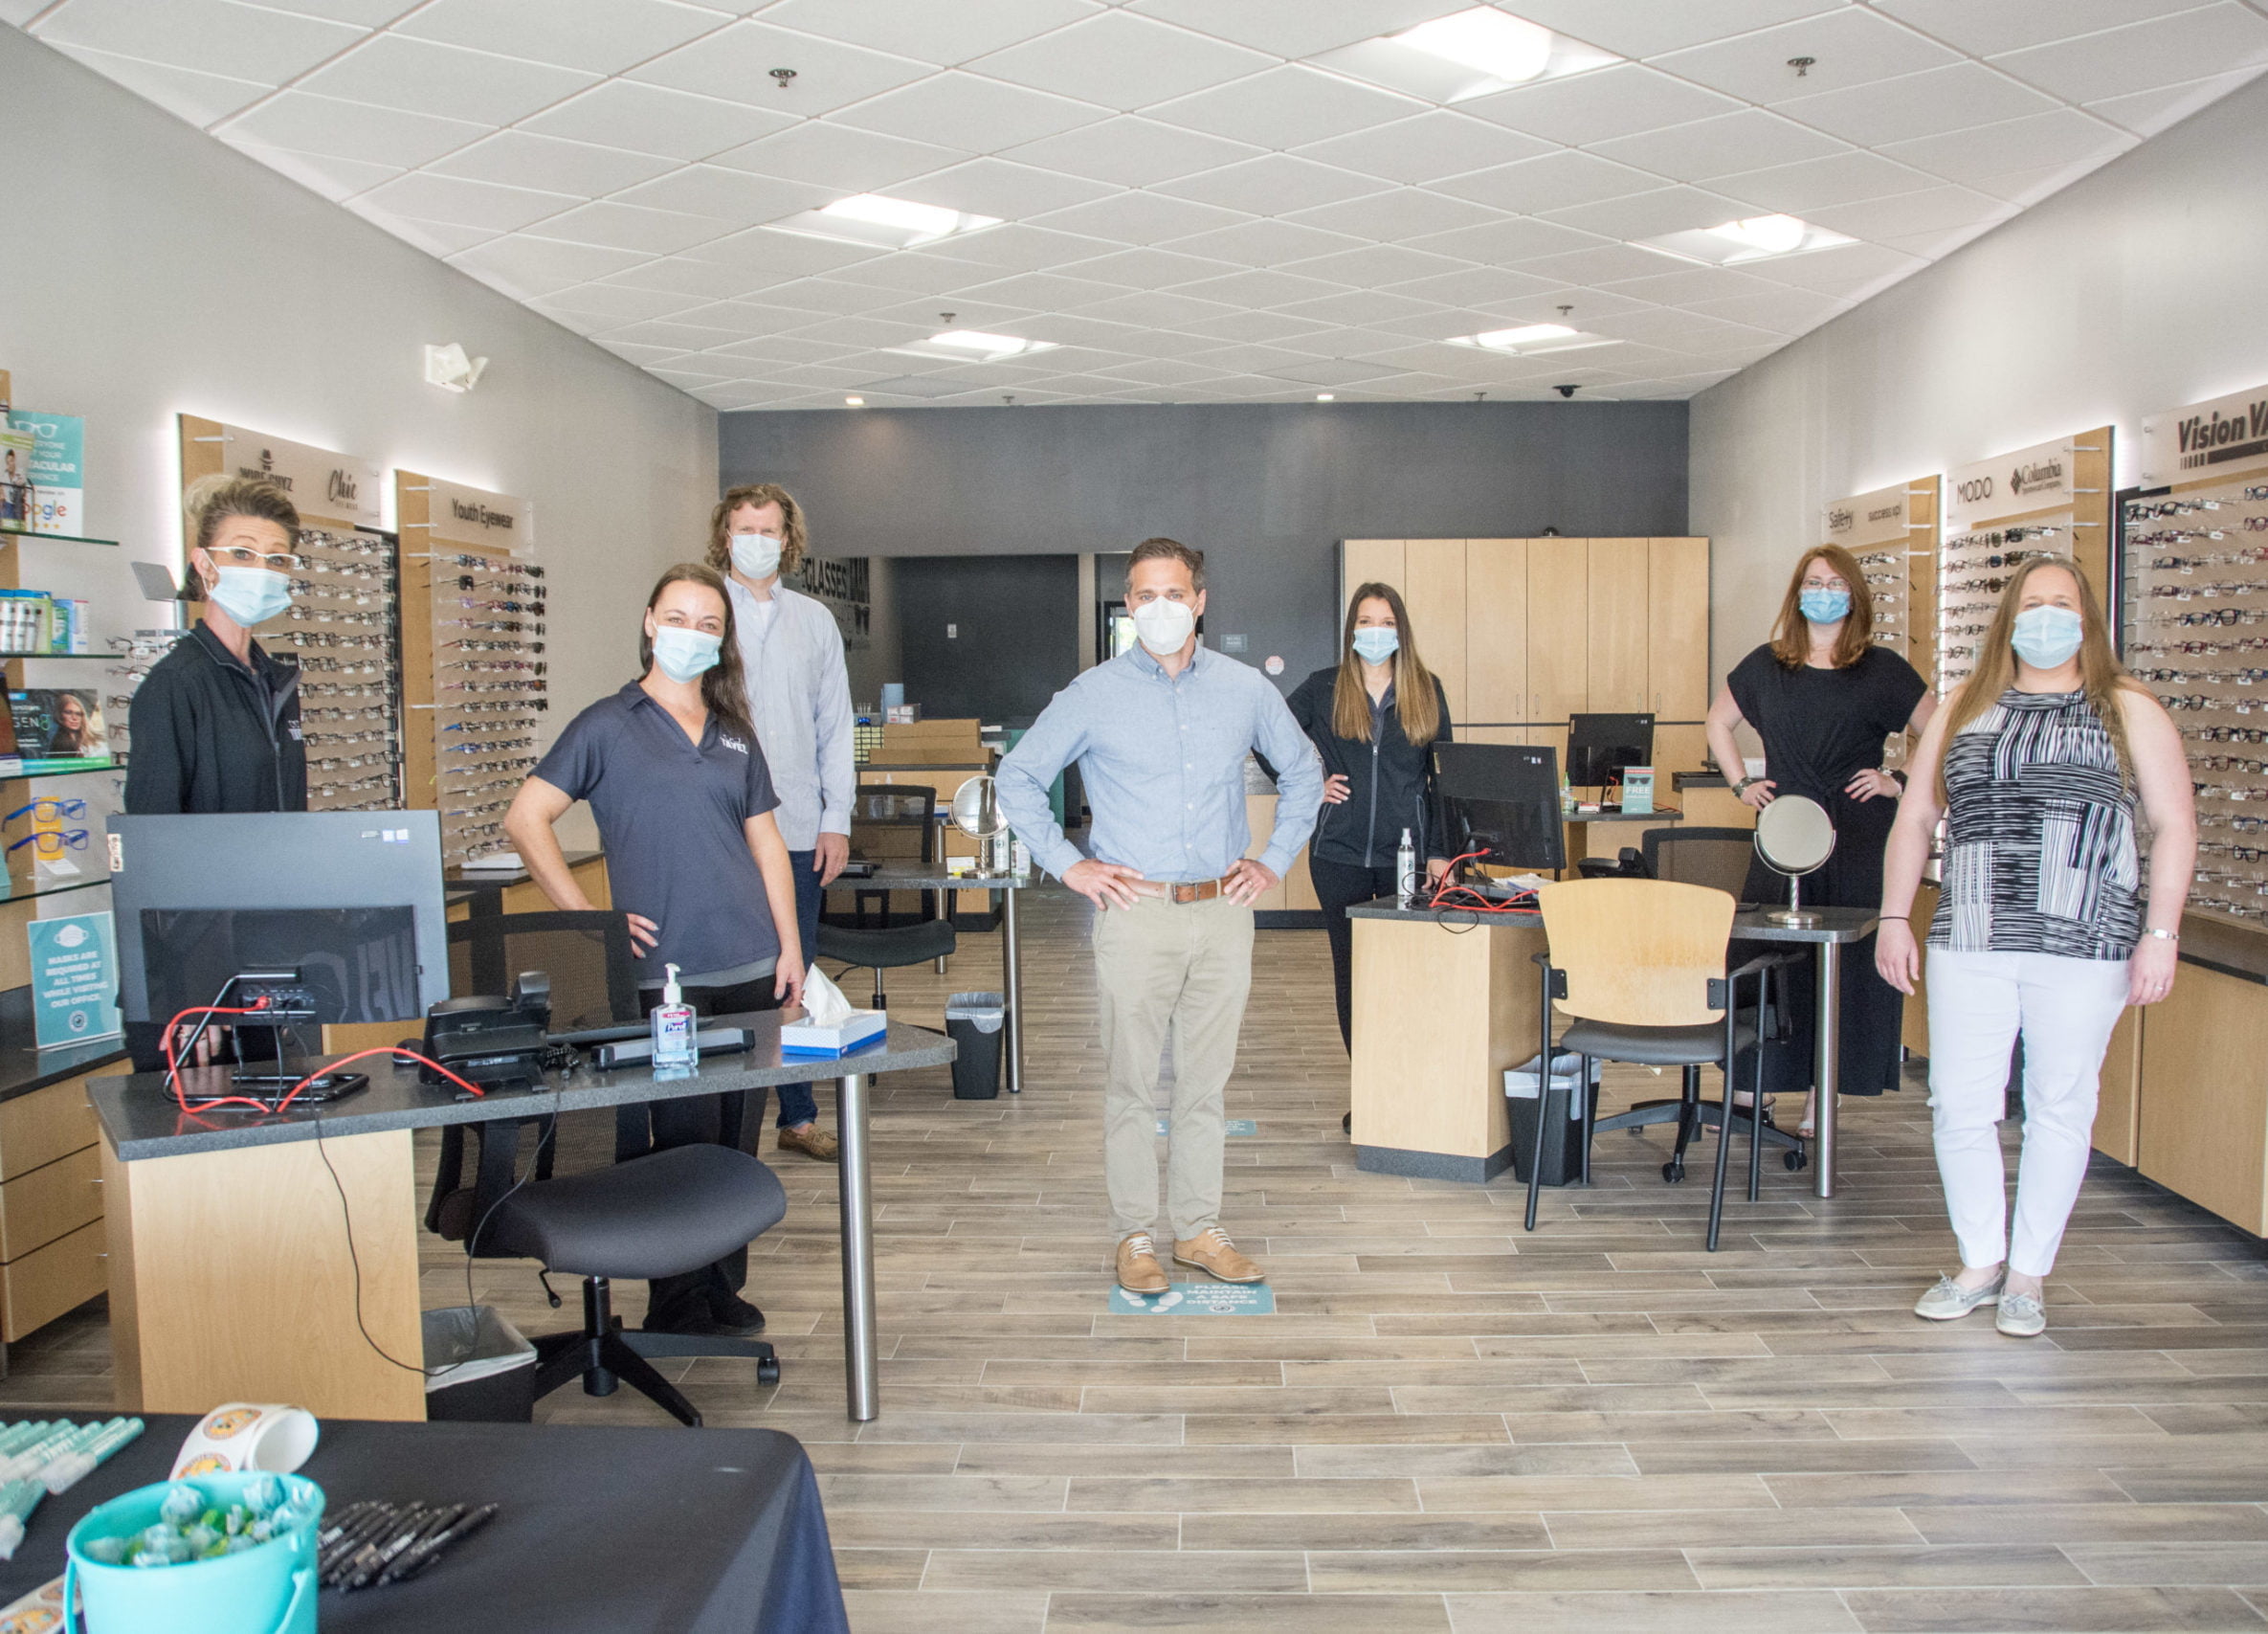 Dr. Tavel staff wearing PPE at the new office